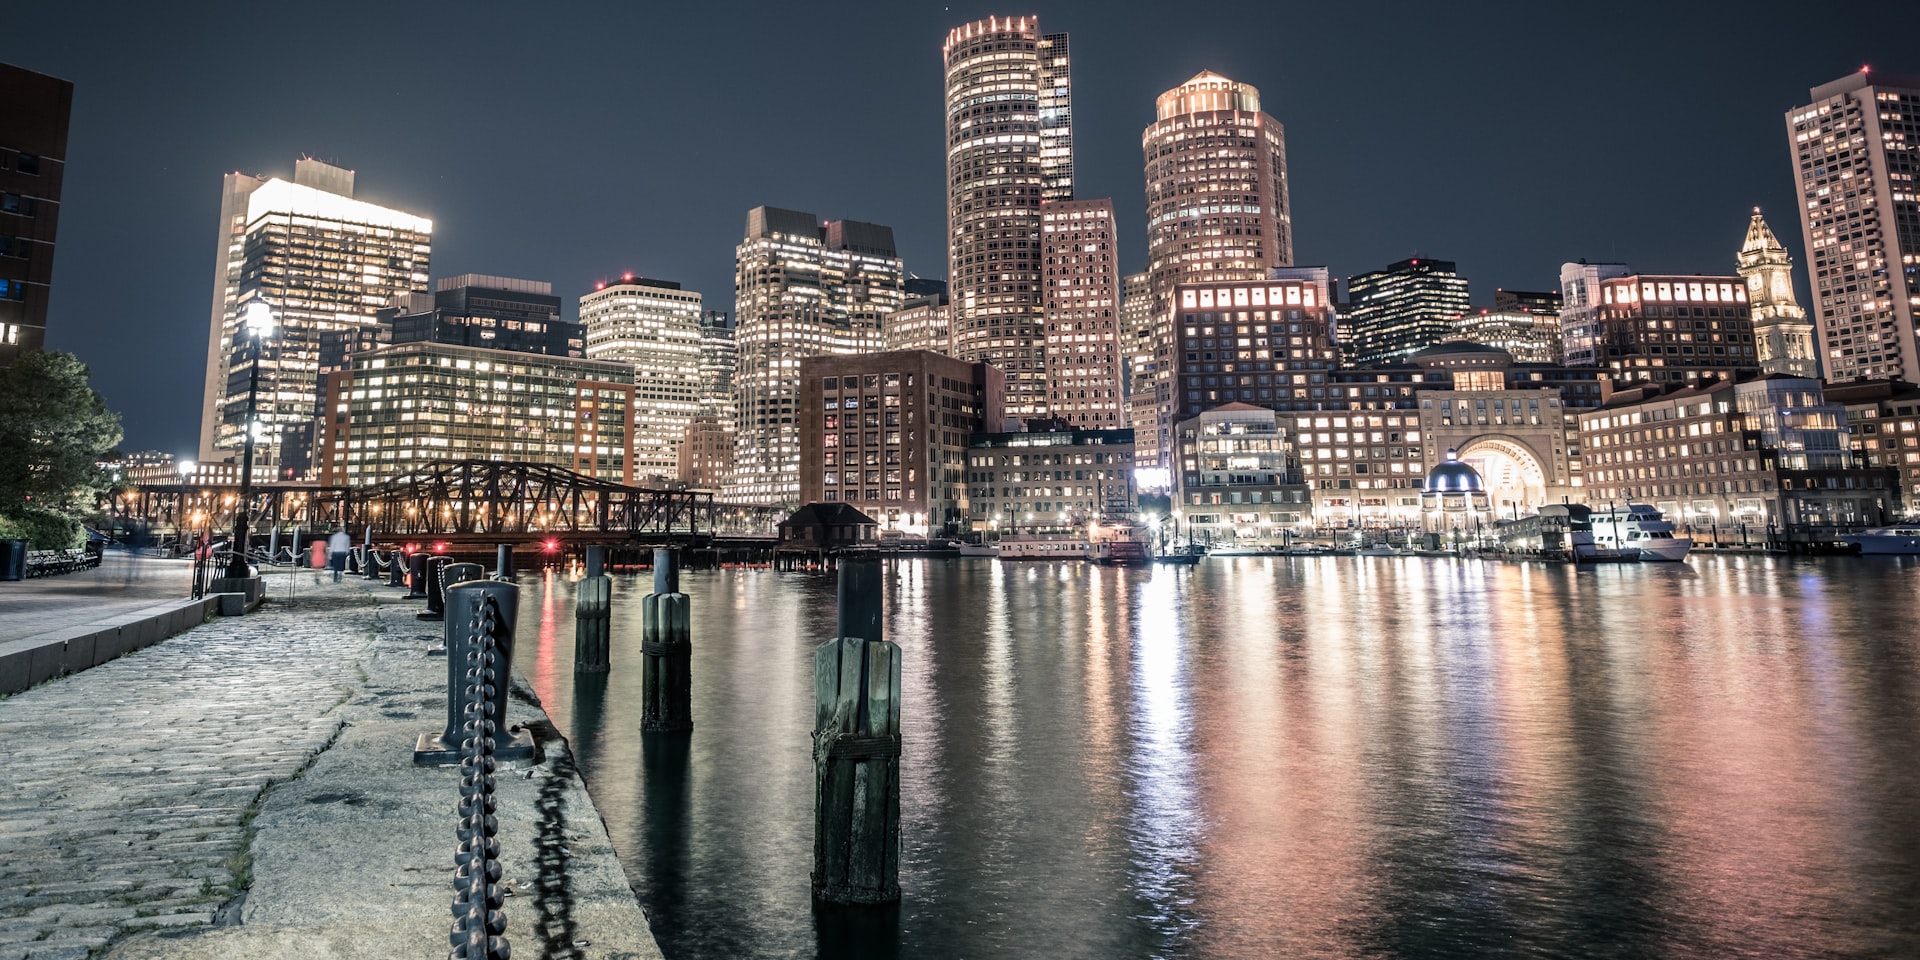 Cover Image for Boston Digital Health Founder Happy Hour: Co-Hosted by LRVHealth and Rock Health Capital